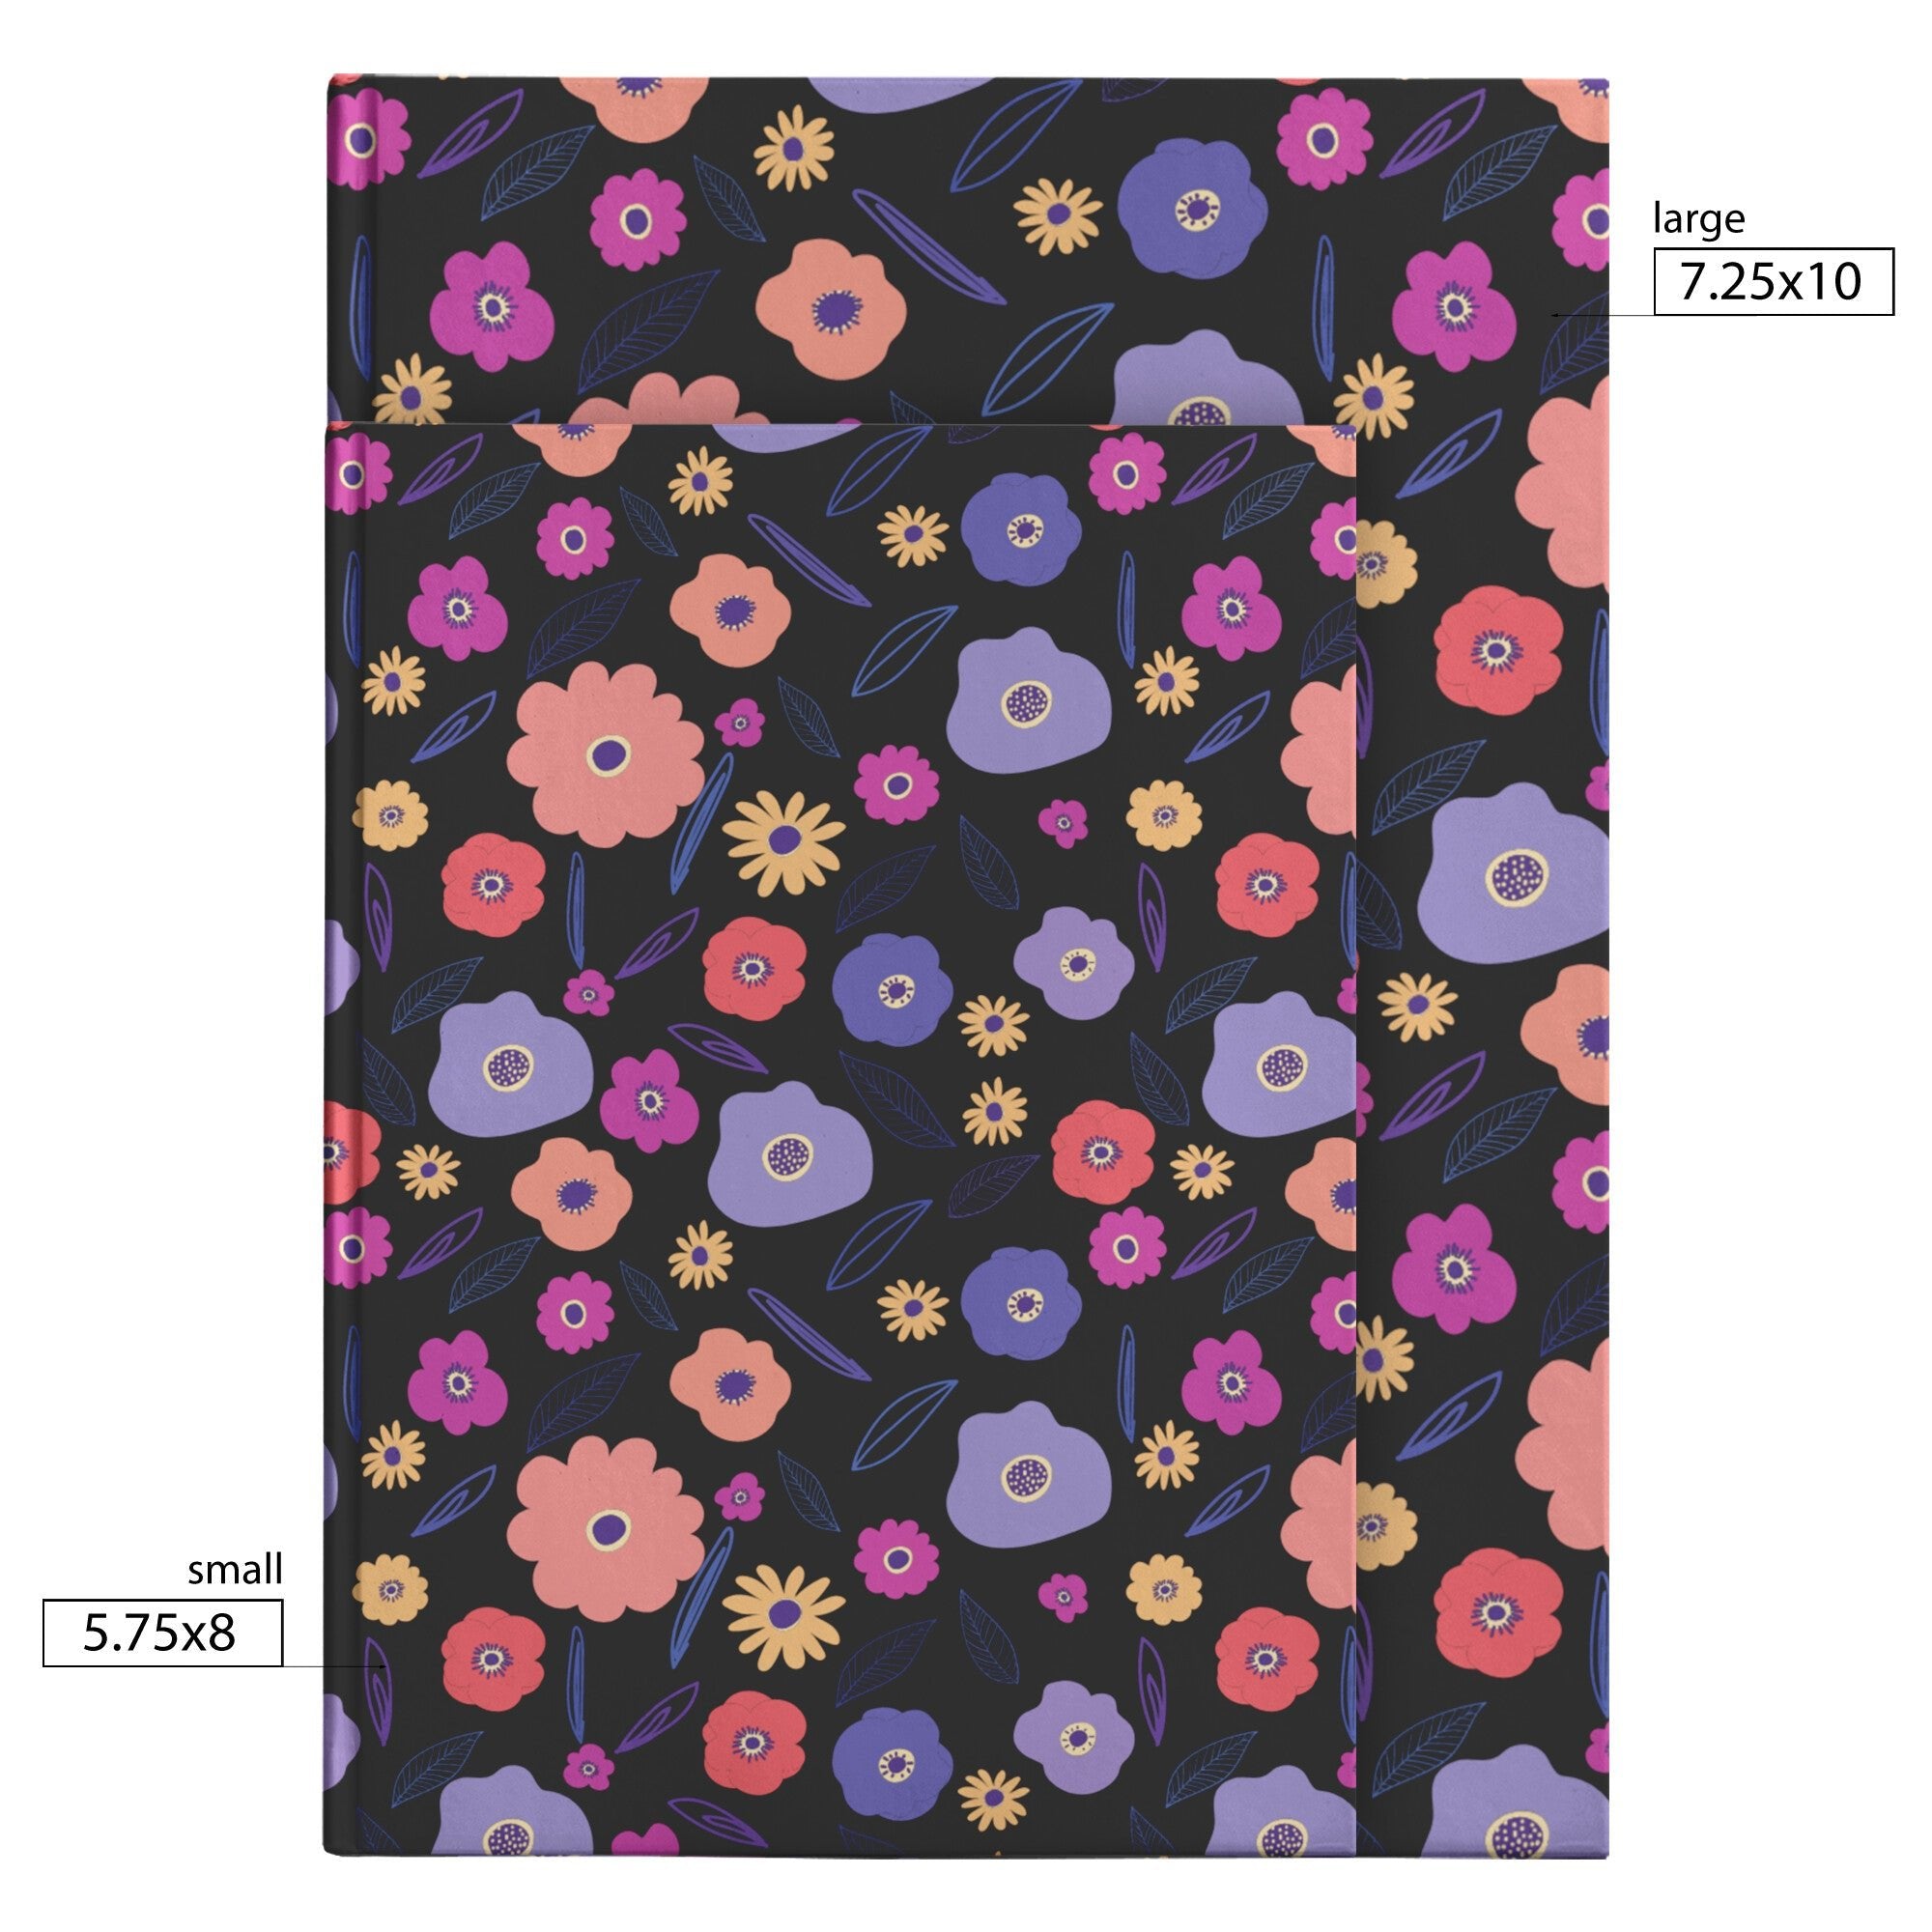 Keep Going Keep Growing Dark Floral Hardcover Journal - The Kindness Cause